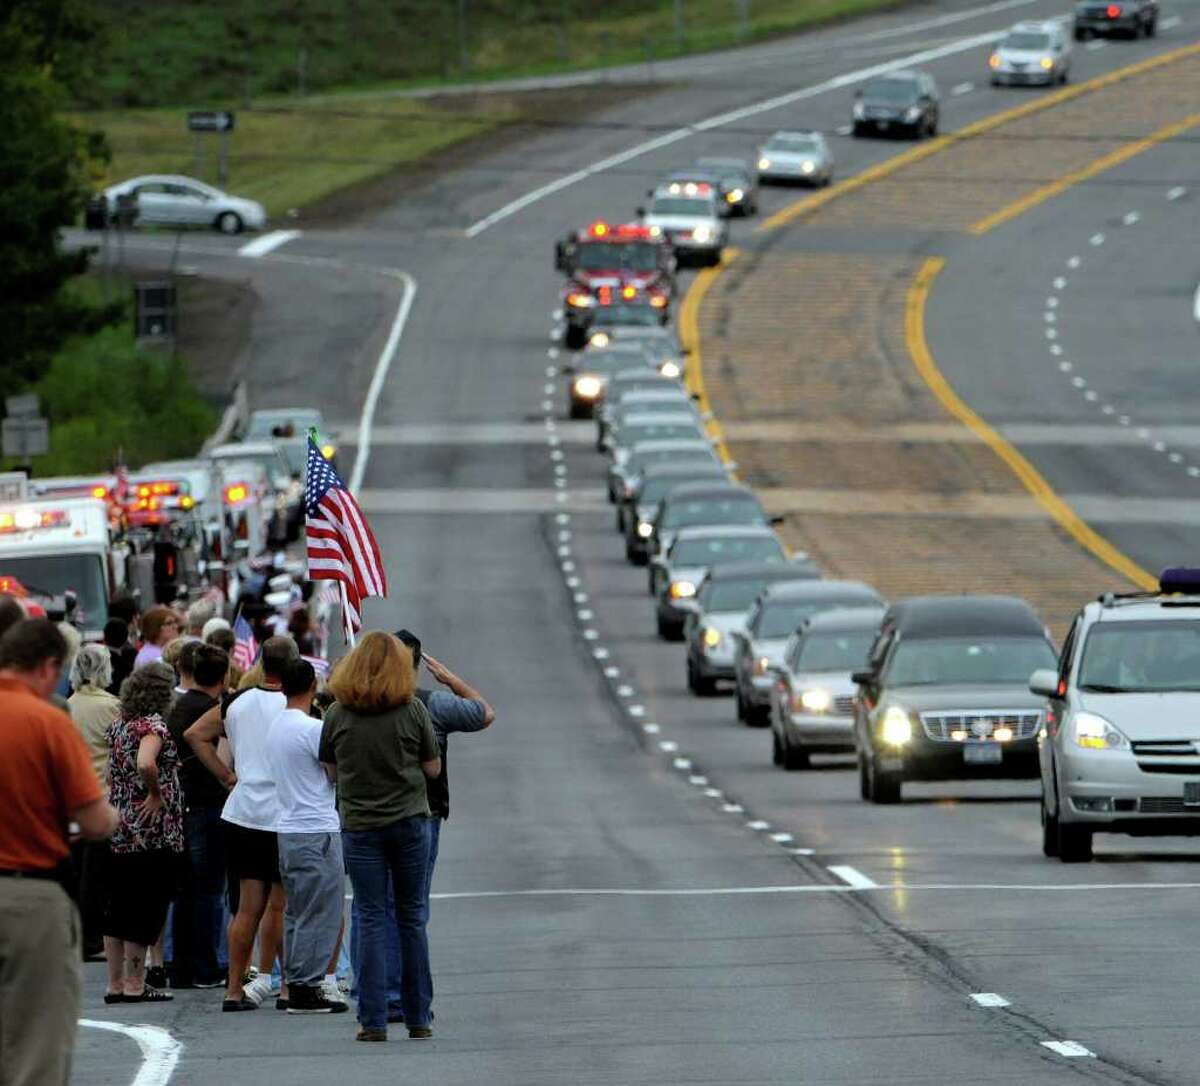 The casket carrying the remains of Staff Sgt. Derek Farley is moved down Routes 9 and 20 in Schodack on August 25, 2010. (Skip Dickstein/Times Union)